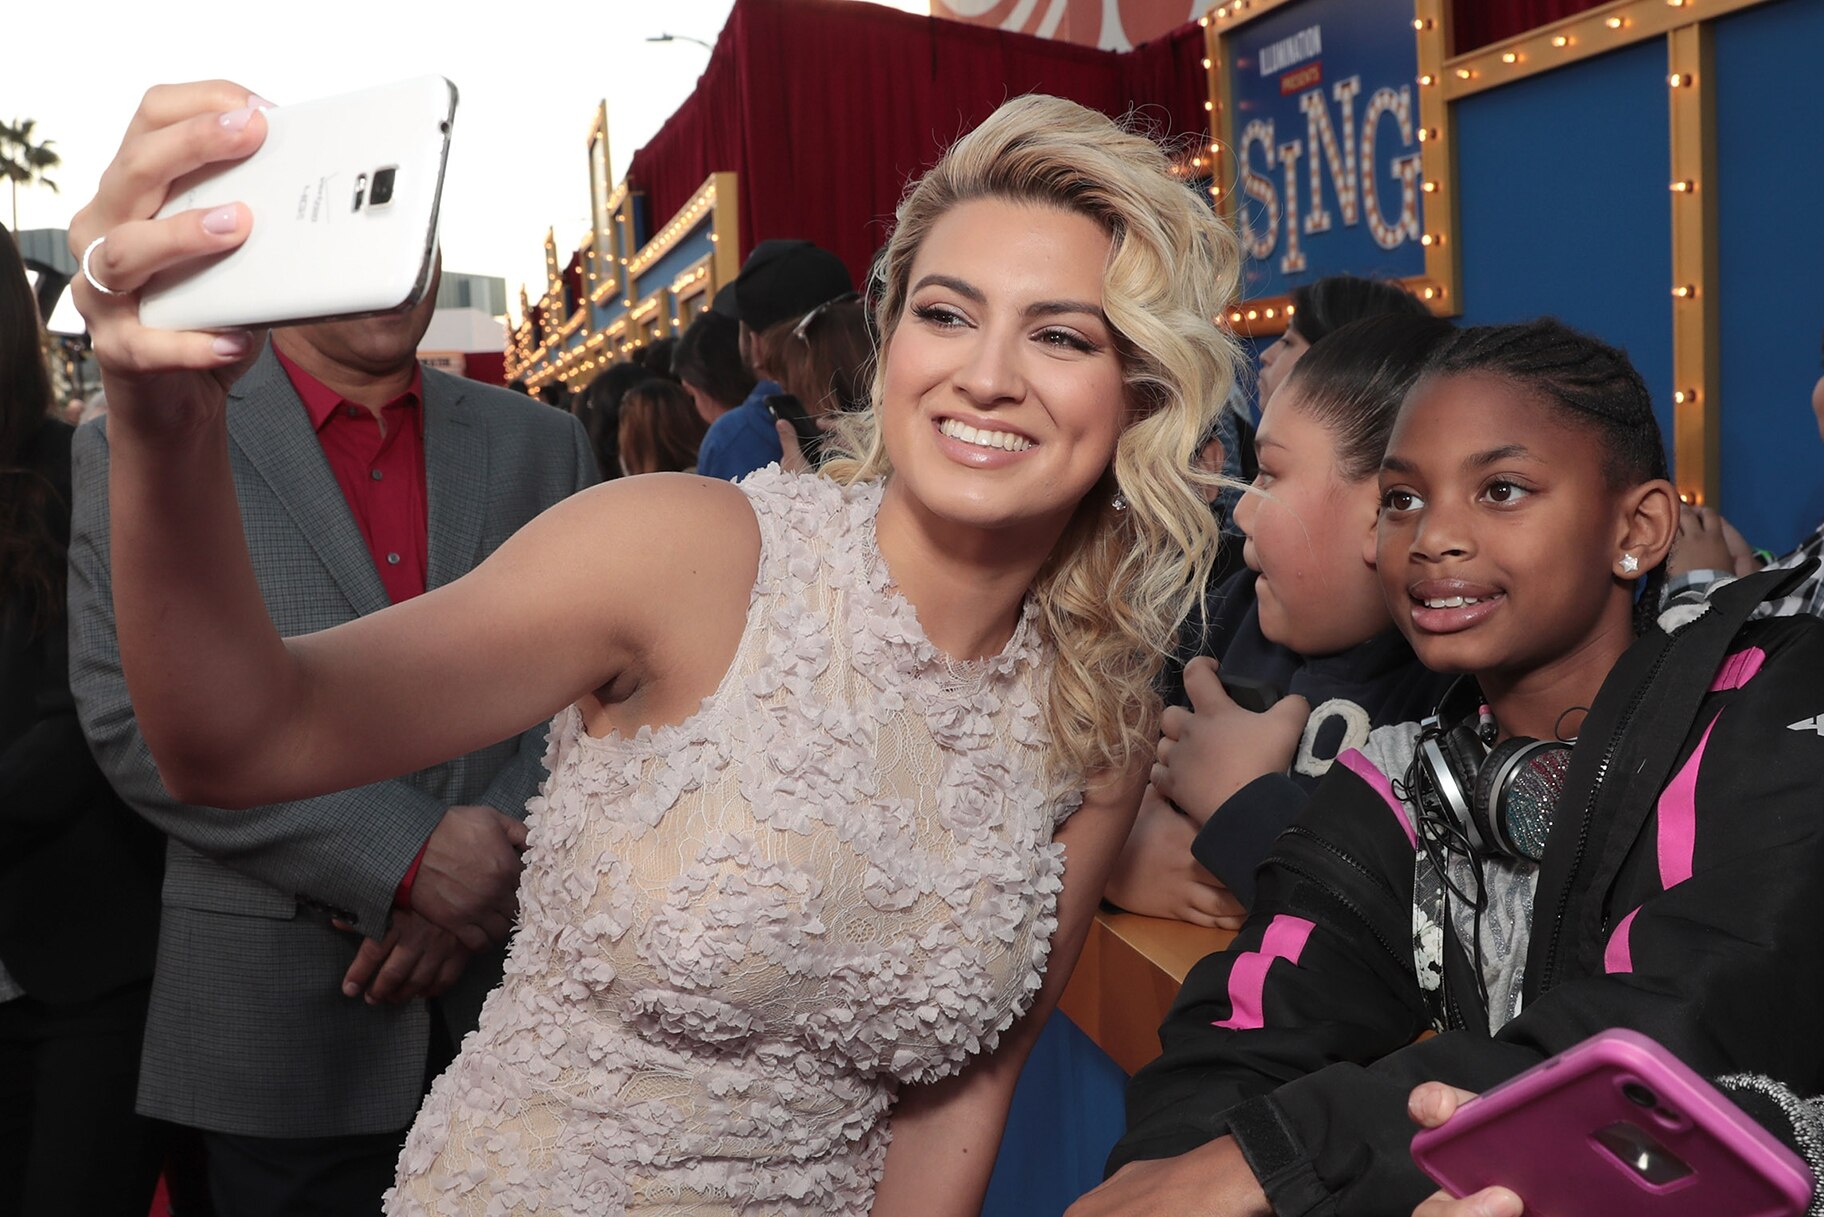 Singer Tori Kelly Is On The Verge Of Being A Household Name1824 x 1217